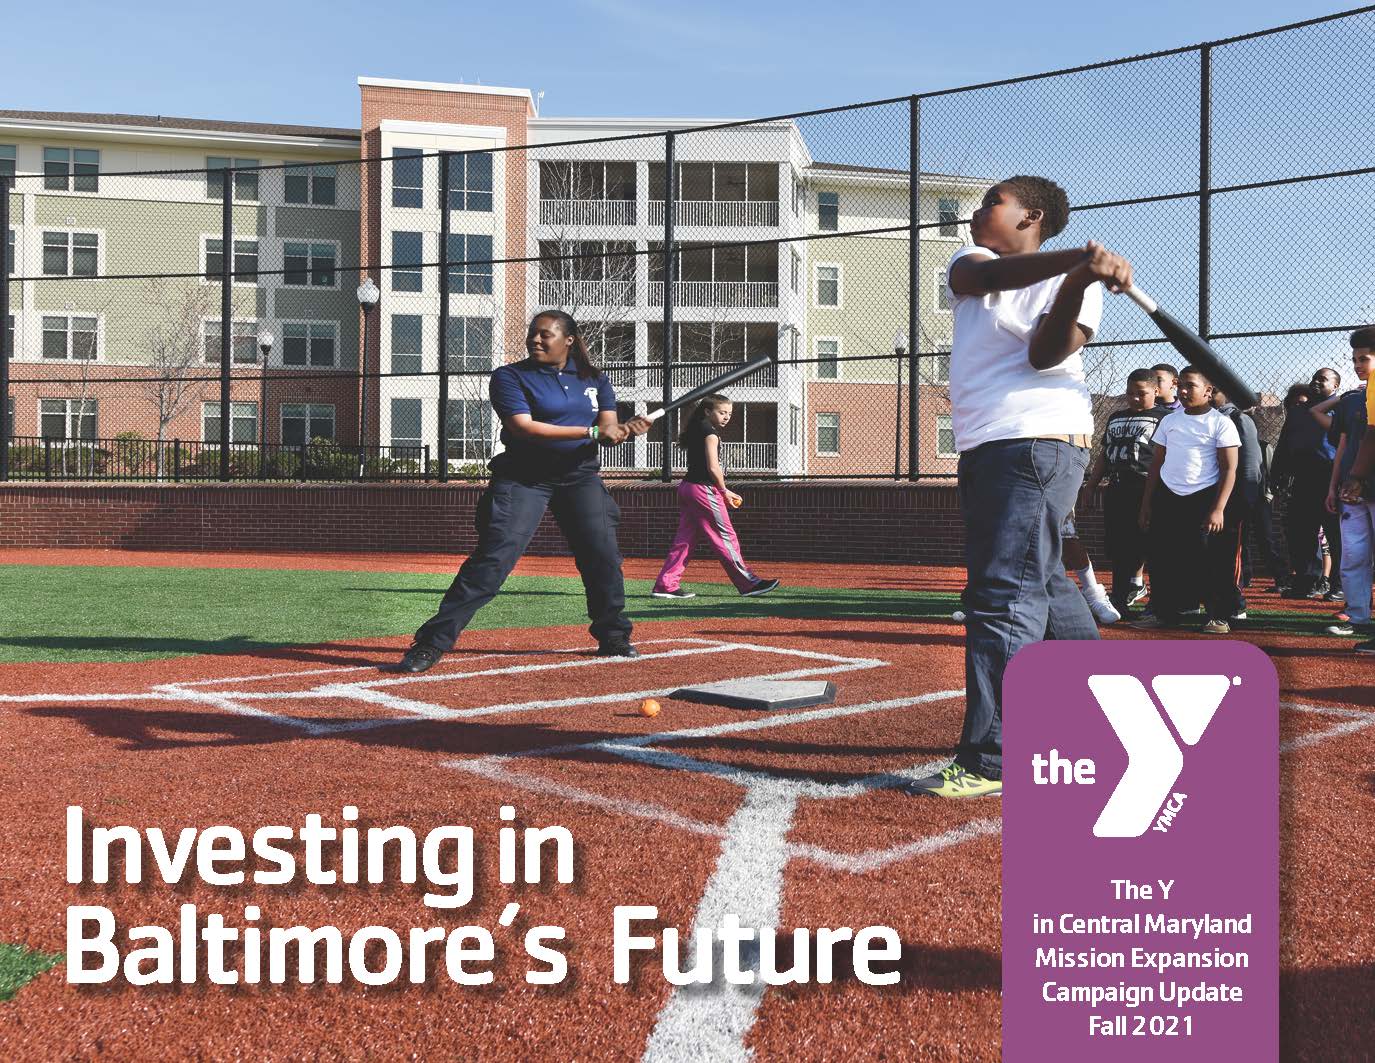 Cover Image for the Y's Mission Expansion Campaign Update Flipbook